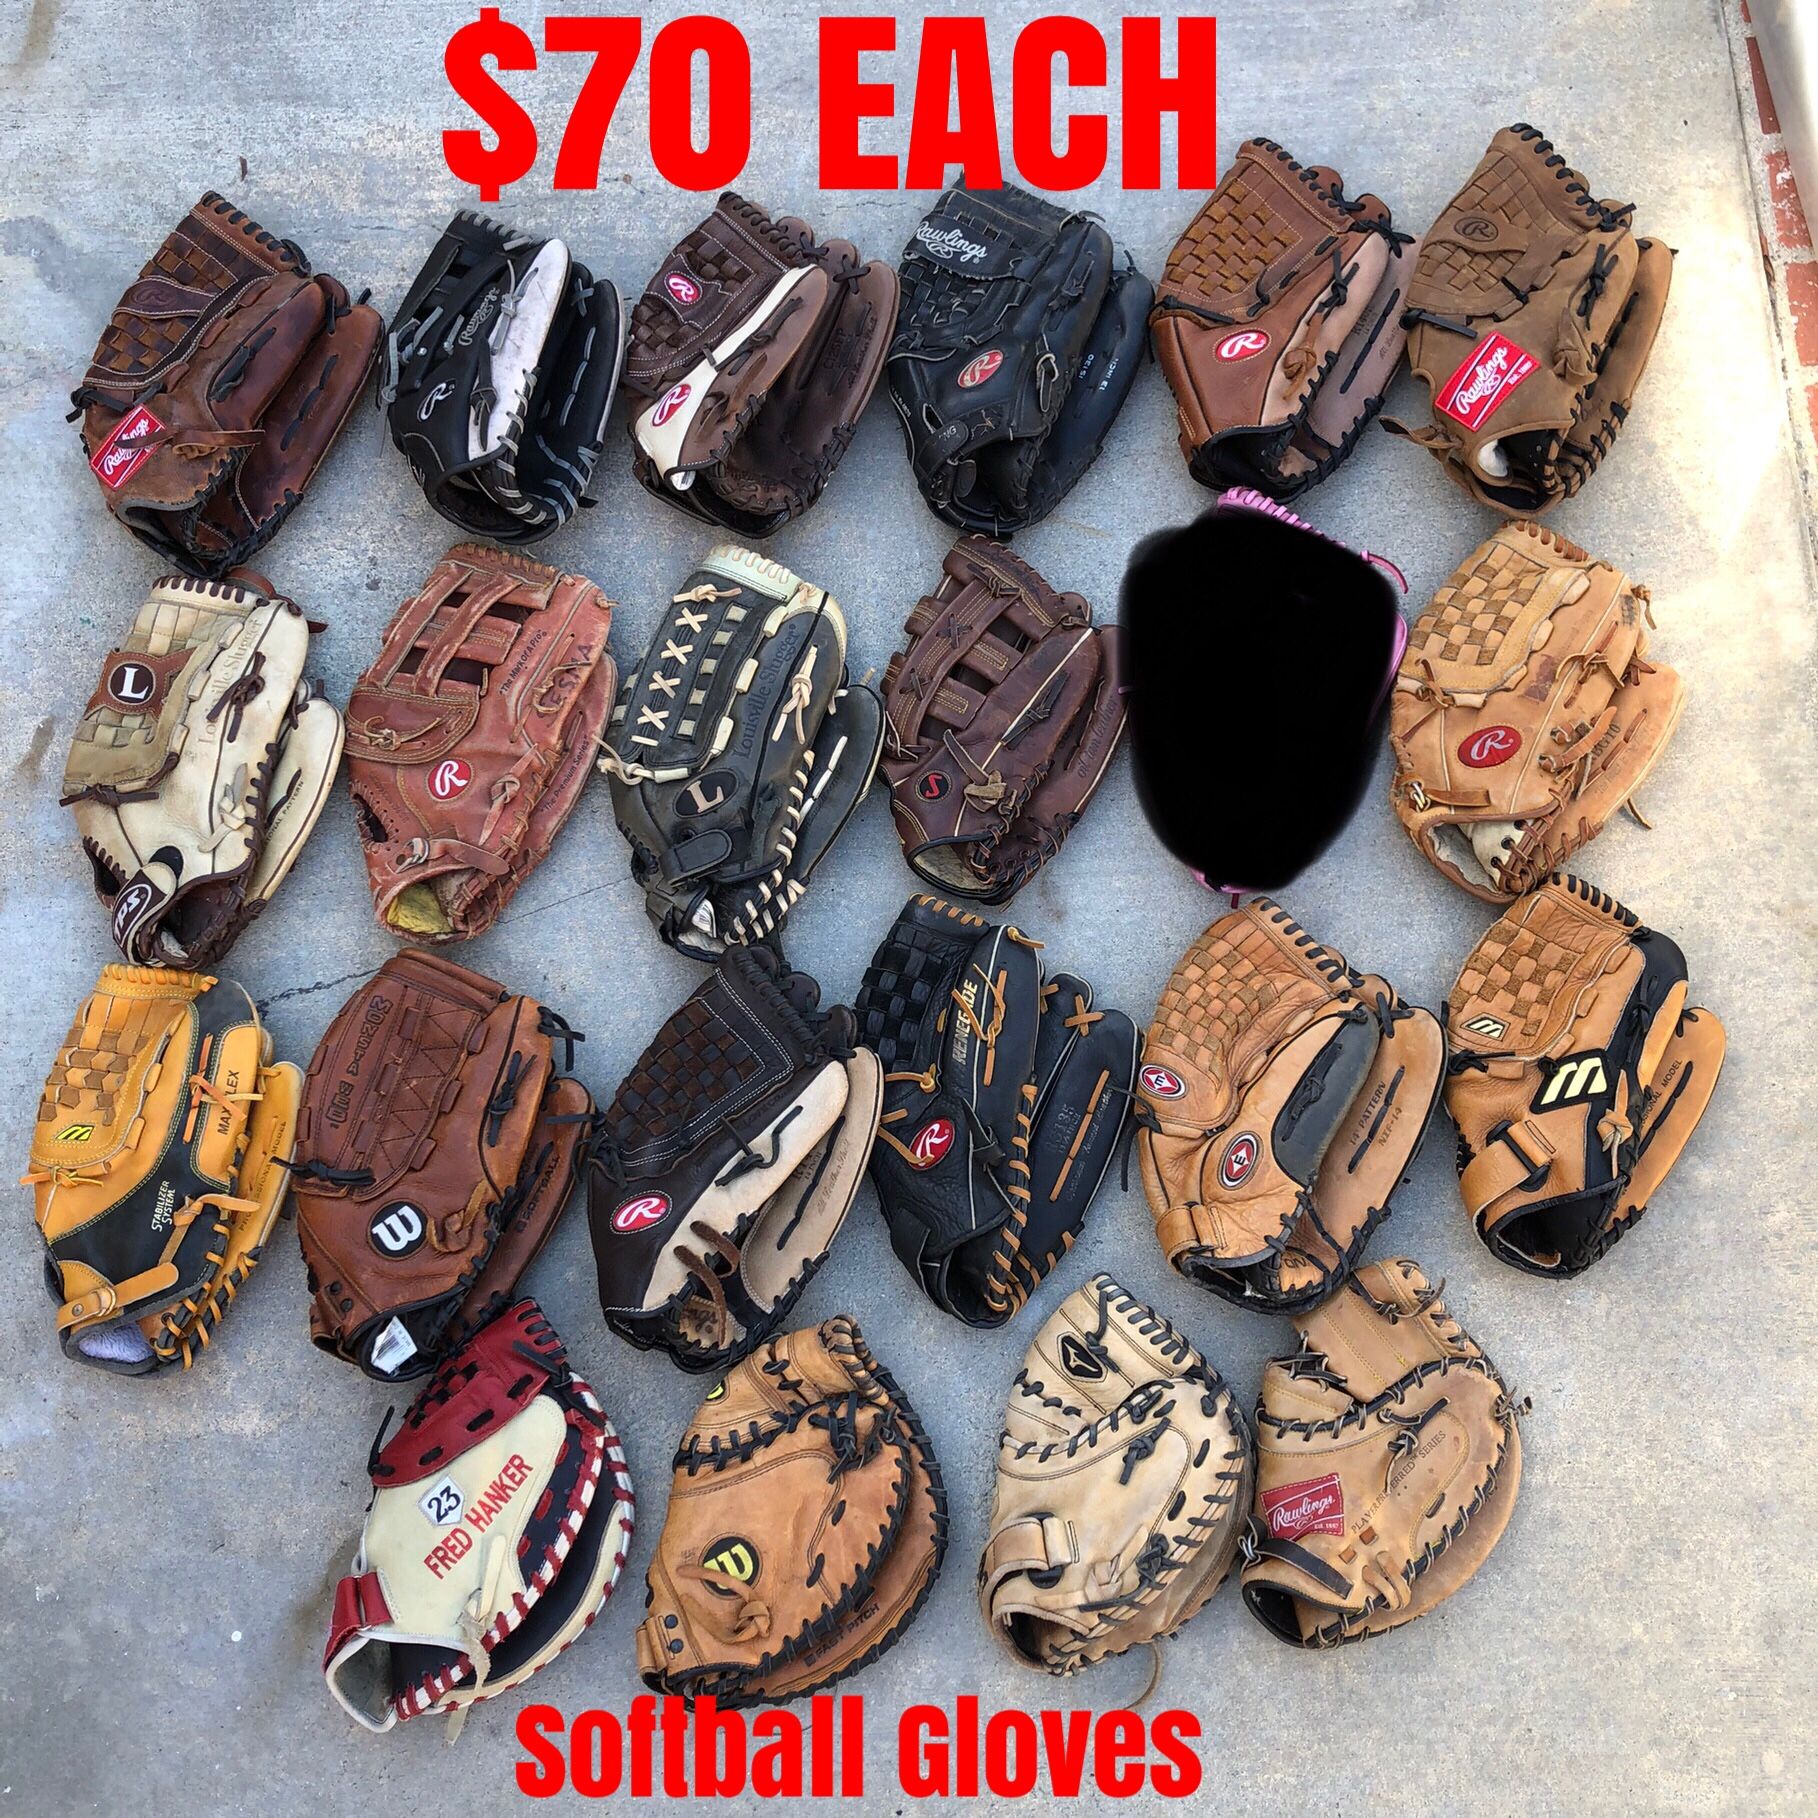 Softball Gloves Catcher gloves All In Great Condition $70 Each or two for $120 Firm Have More Softball And Baseball Equipment On My Profile Page